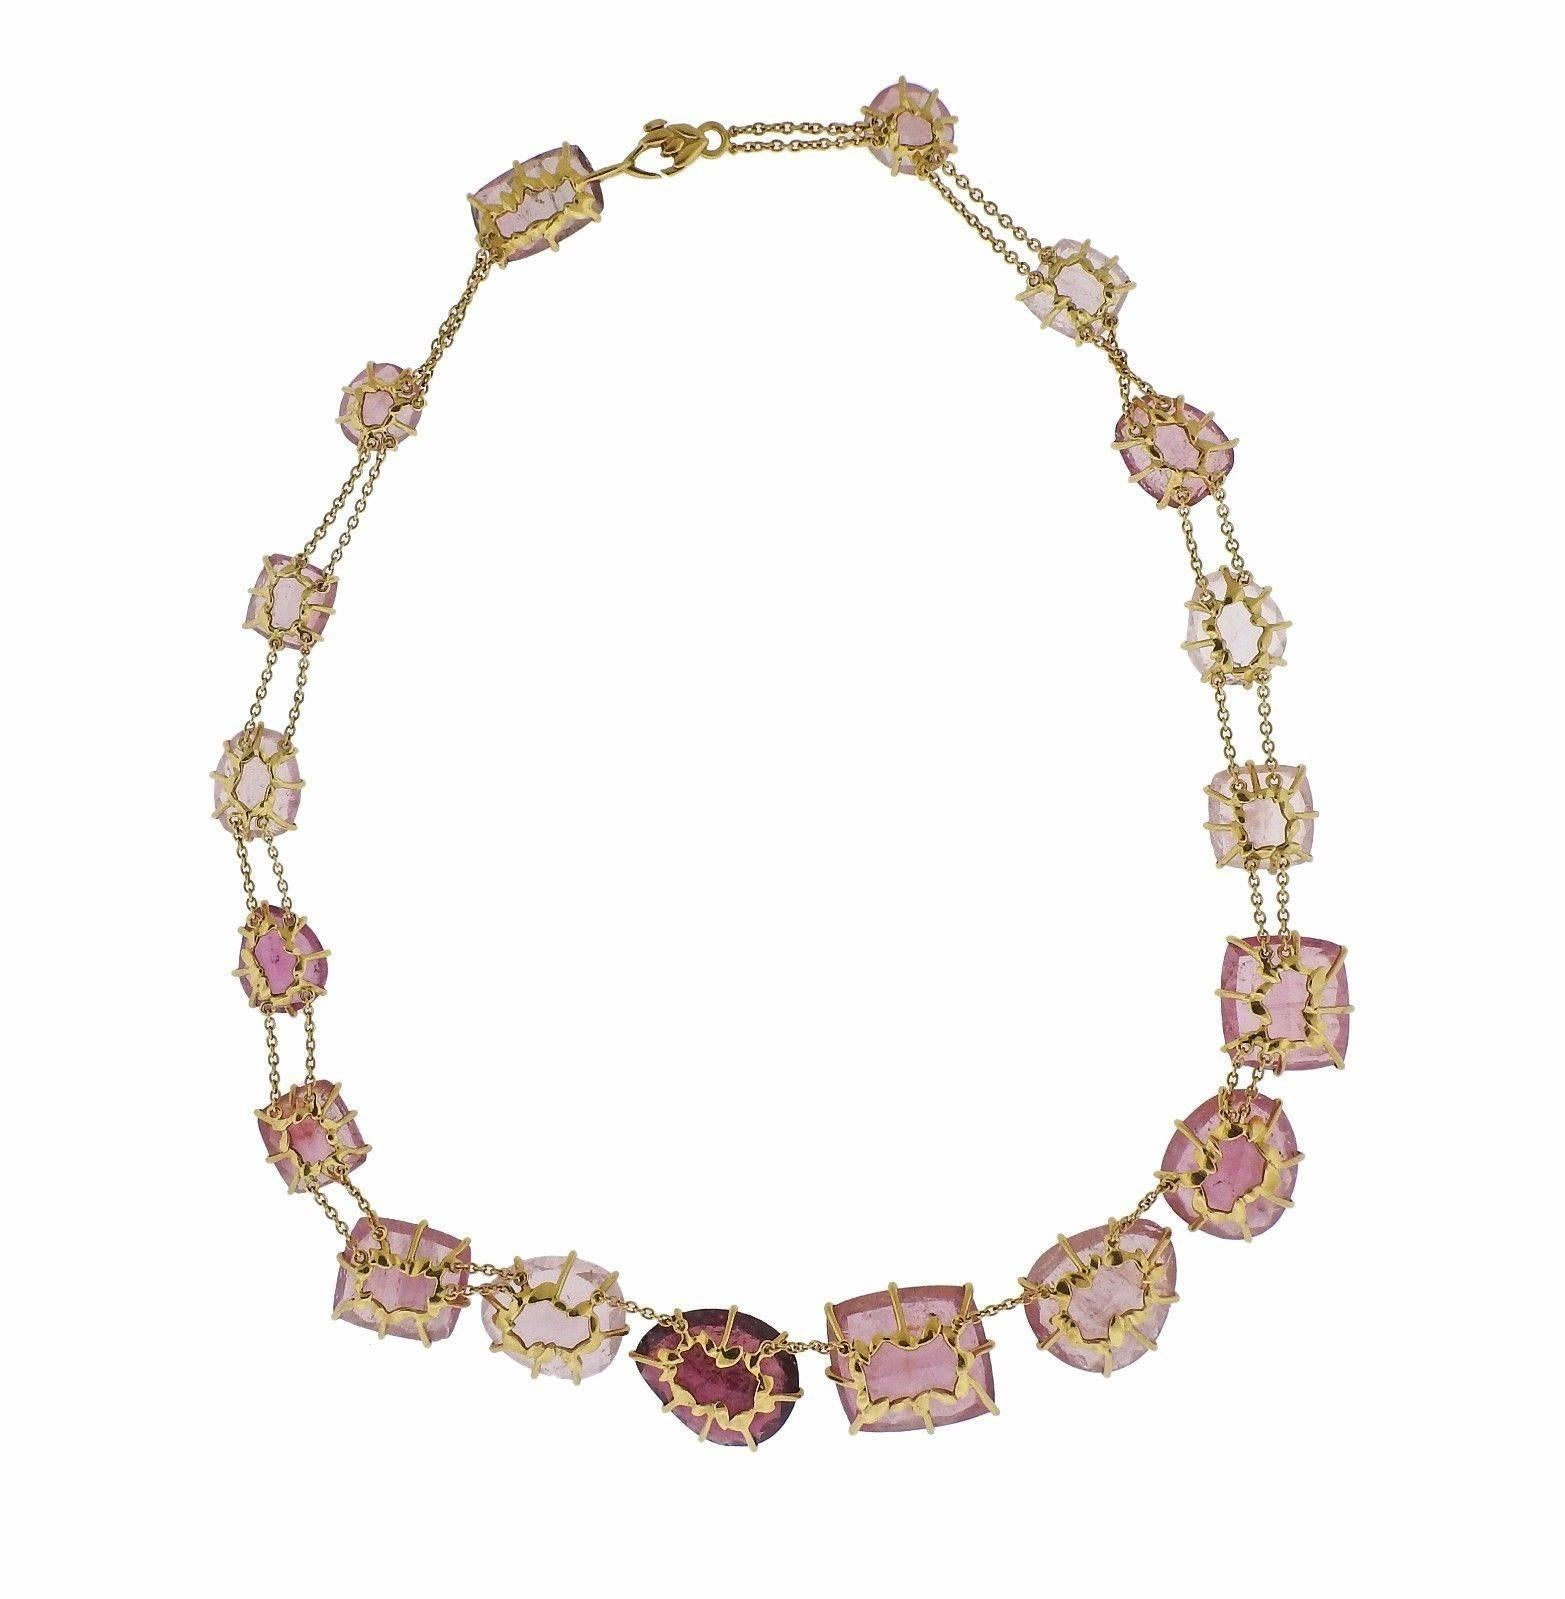 An 18k yellow gold necklace set with pink tourmalines.  The necklace is 16 1/4